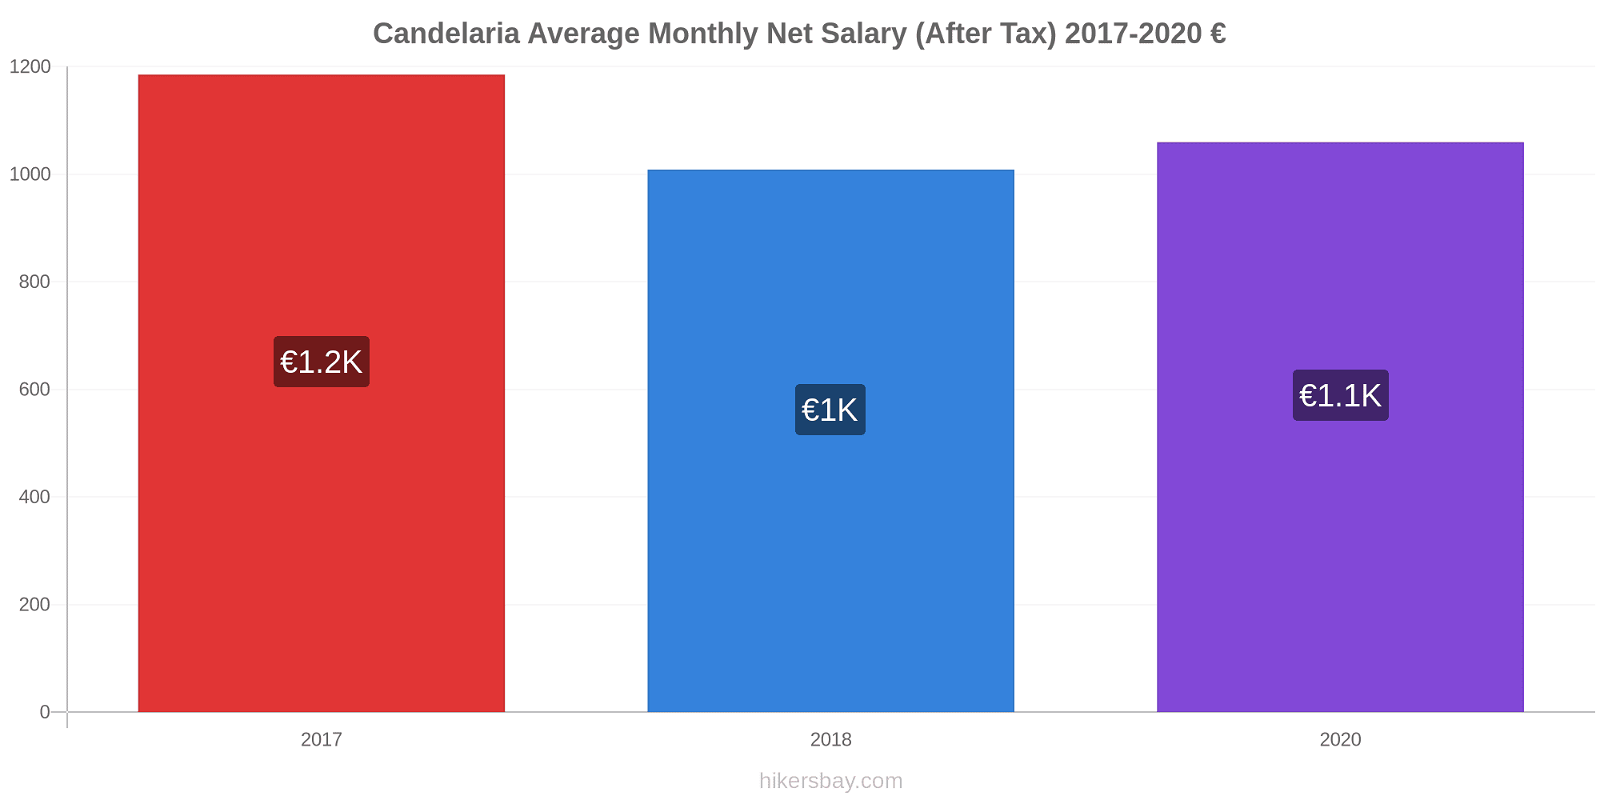 Candelaria price changes Average Monthly Net Salary (After Tax) hikersbay.com